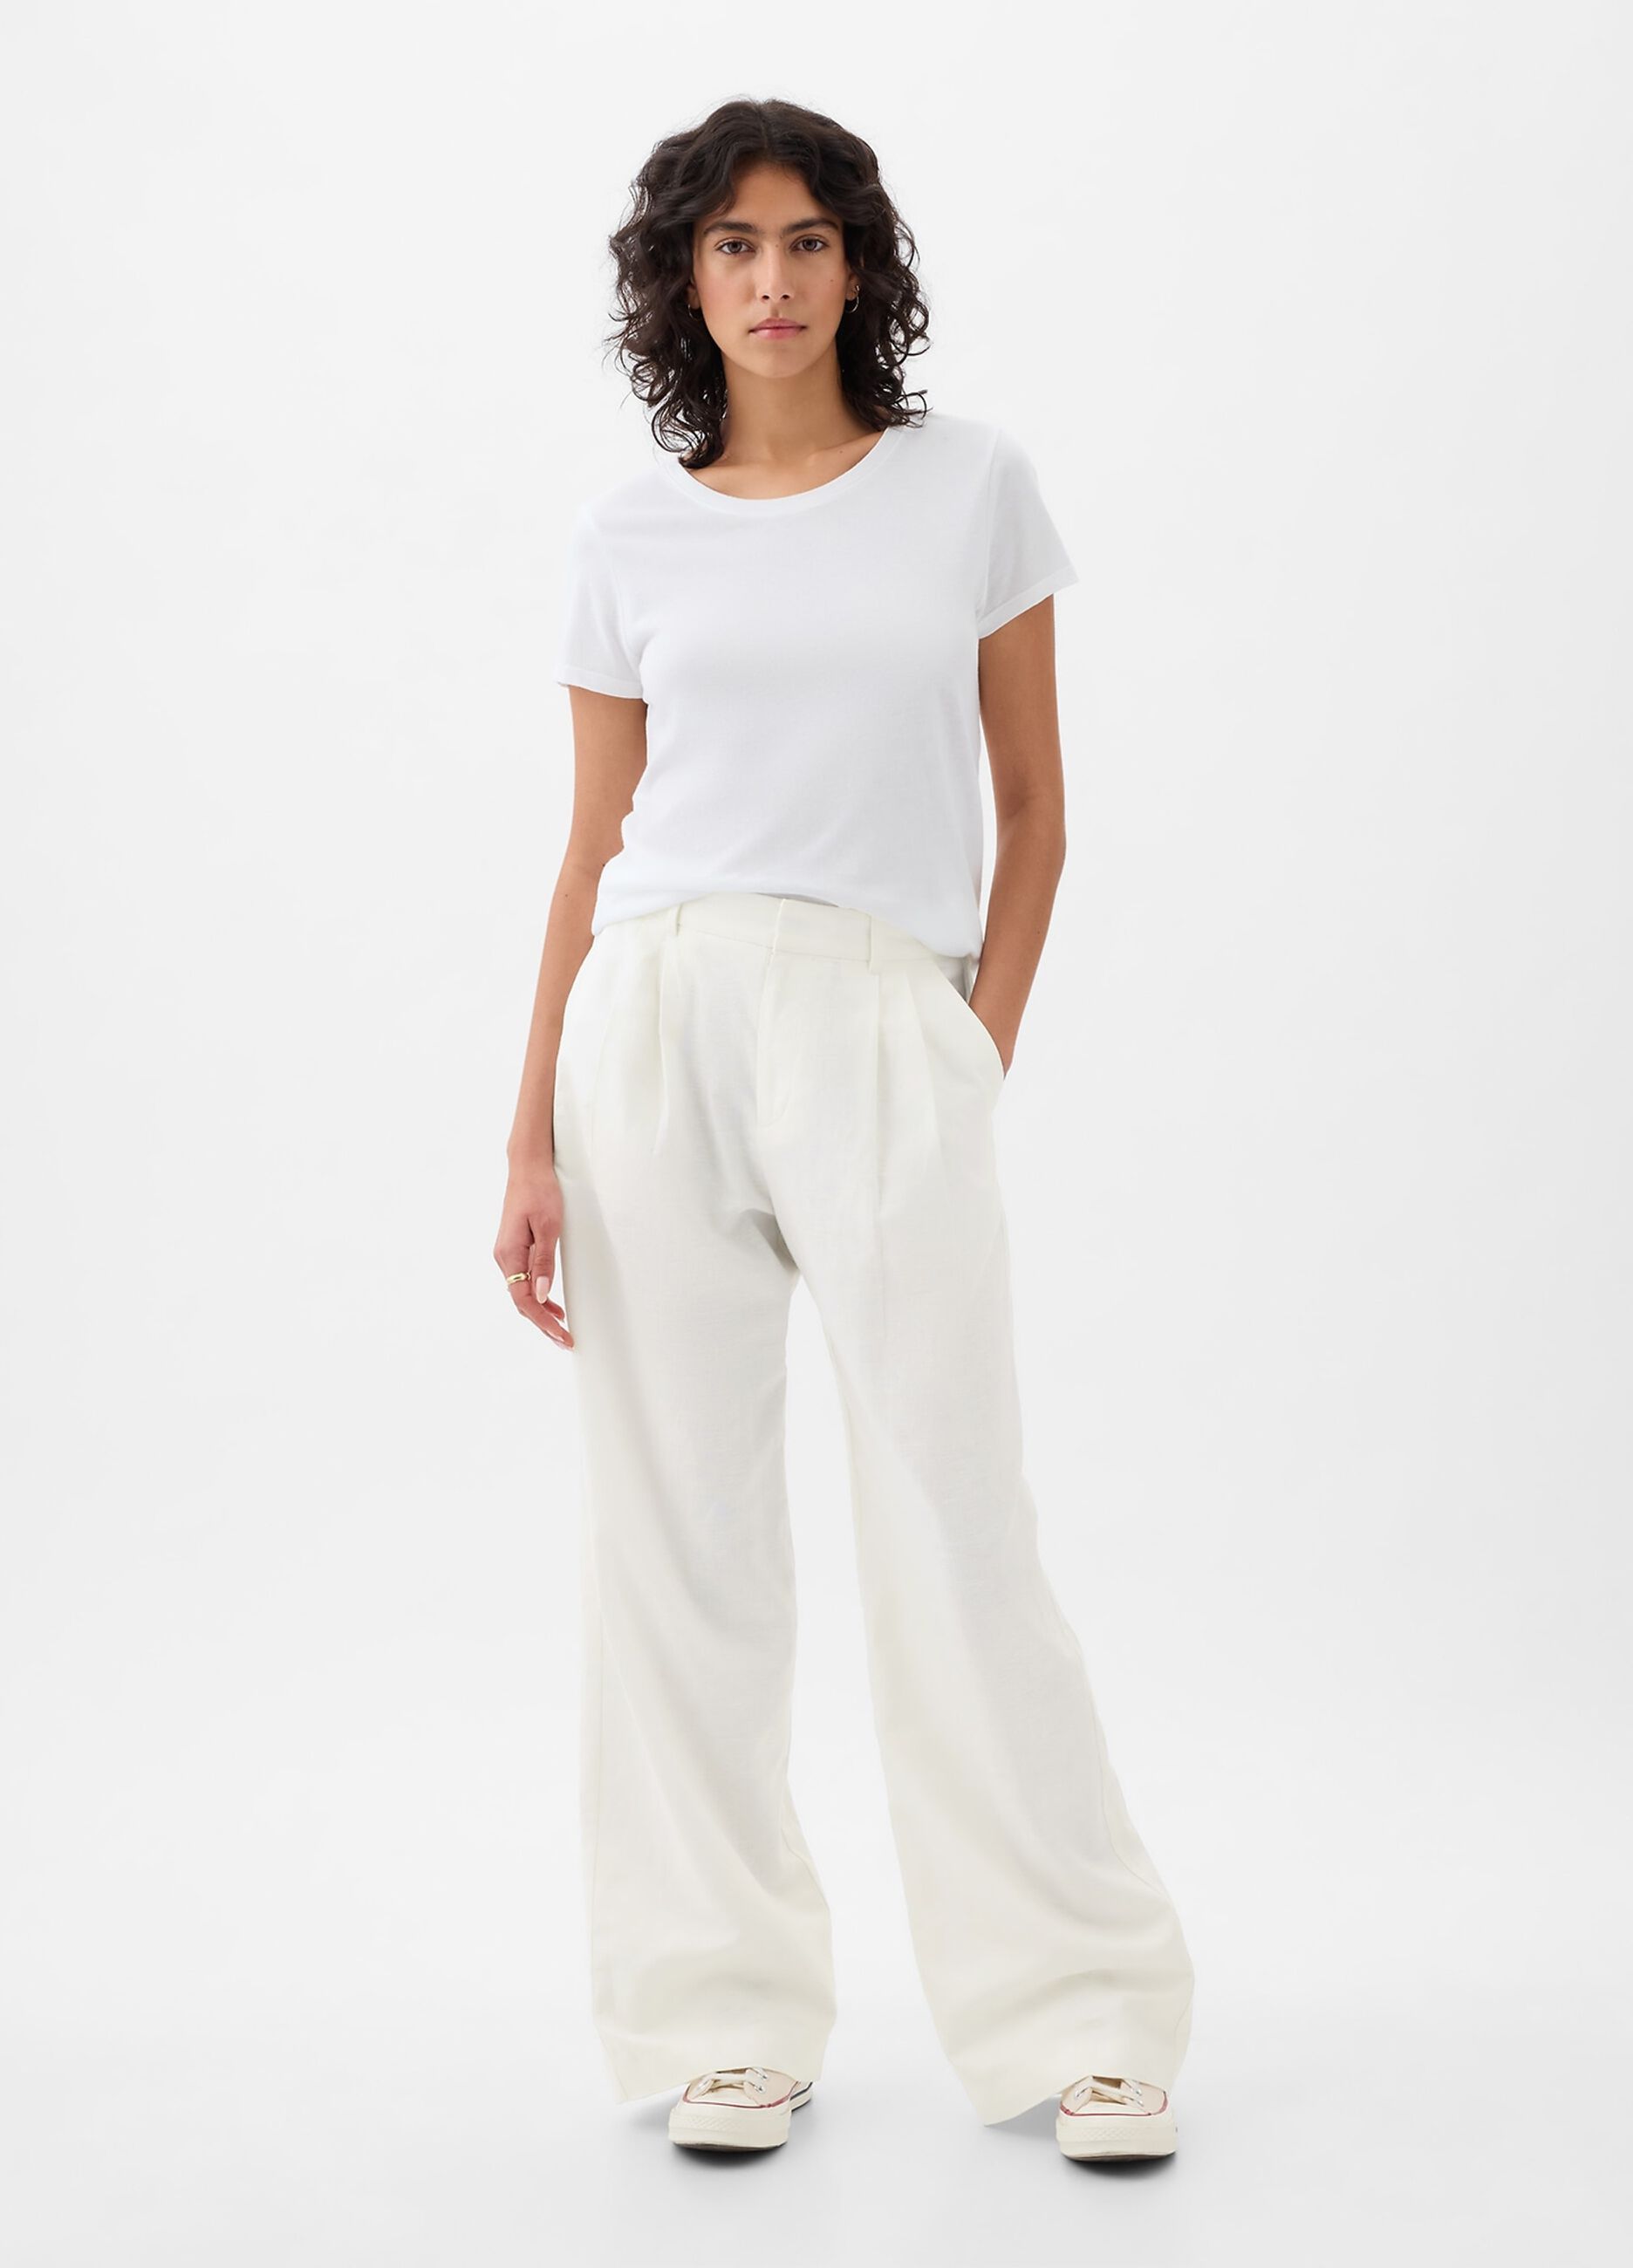 Wide-leg trousers cotton and linen